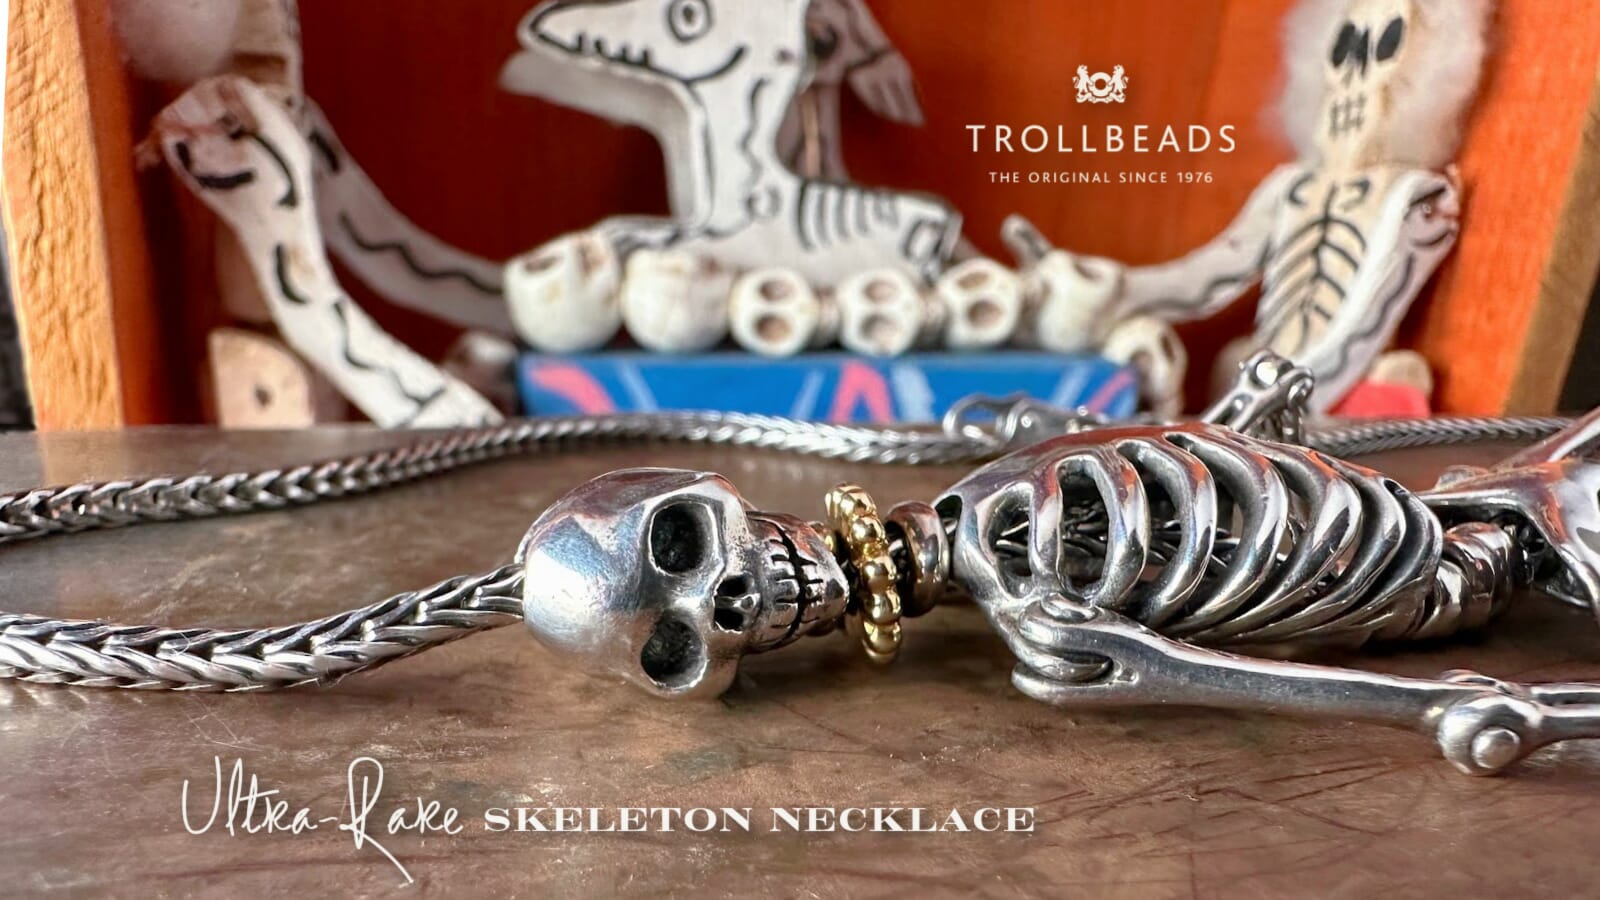 Video showing extremely rare Trollbeads skeleton necklace available at Suzie Q Studio